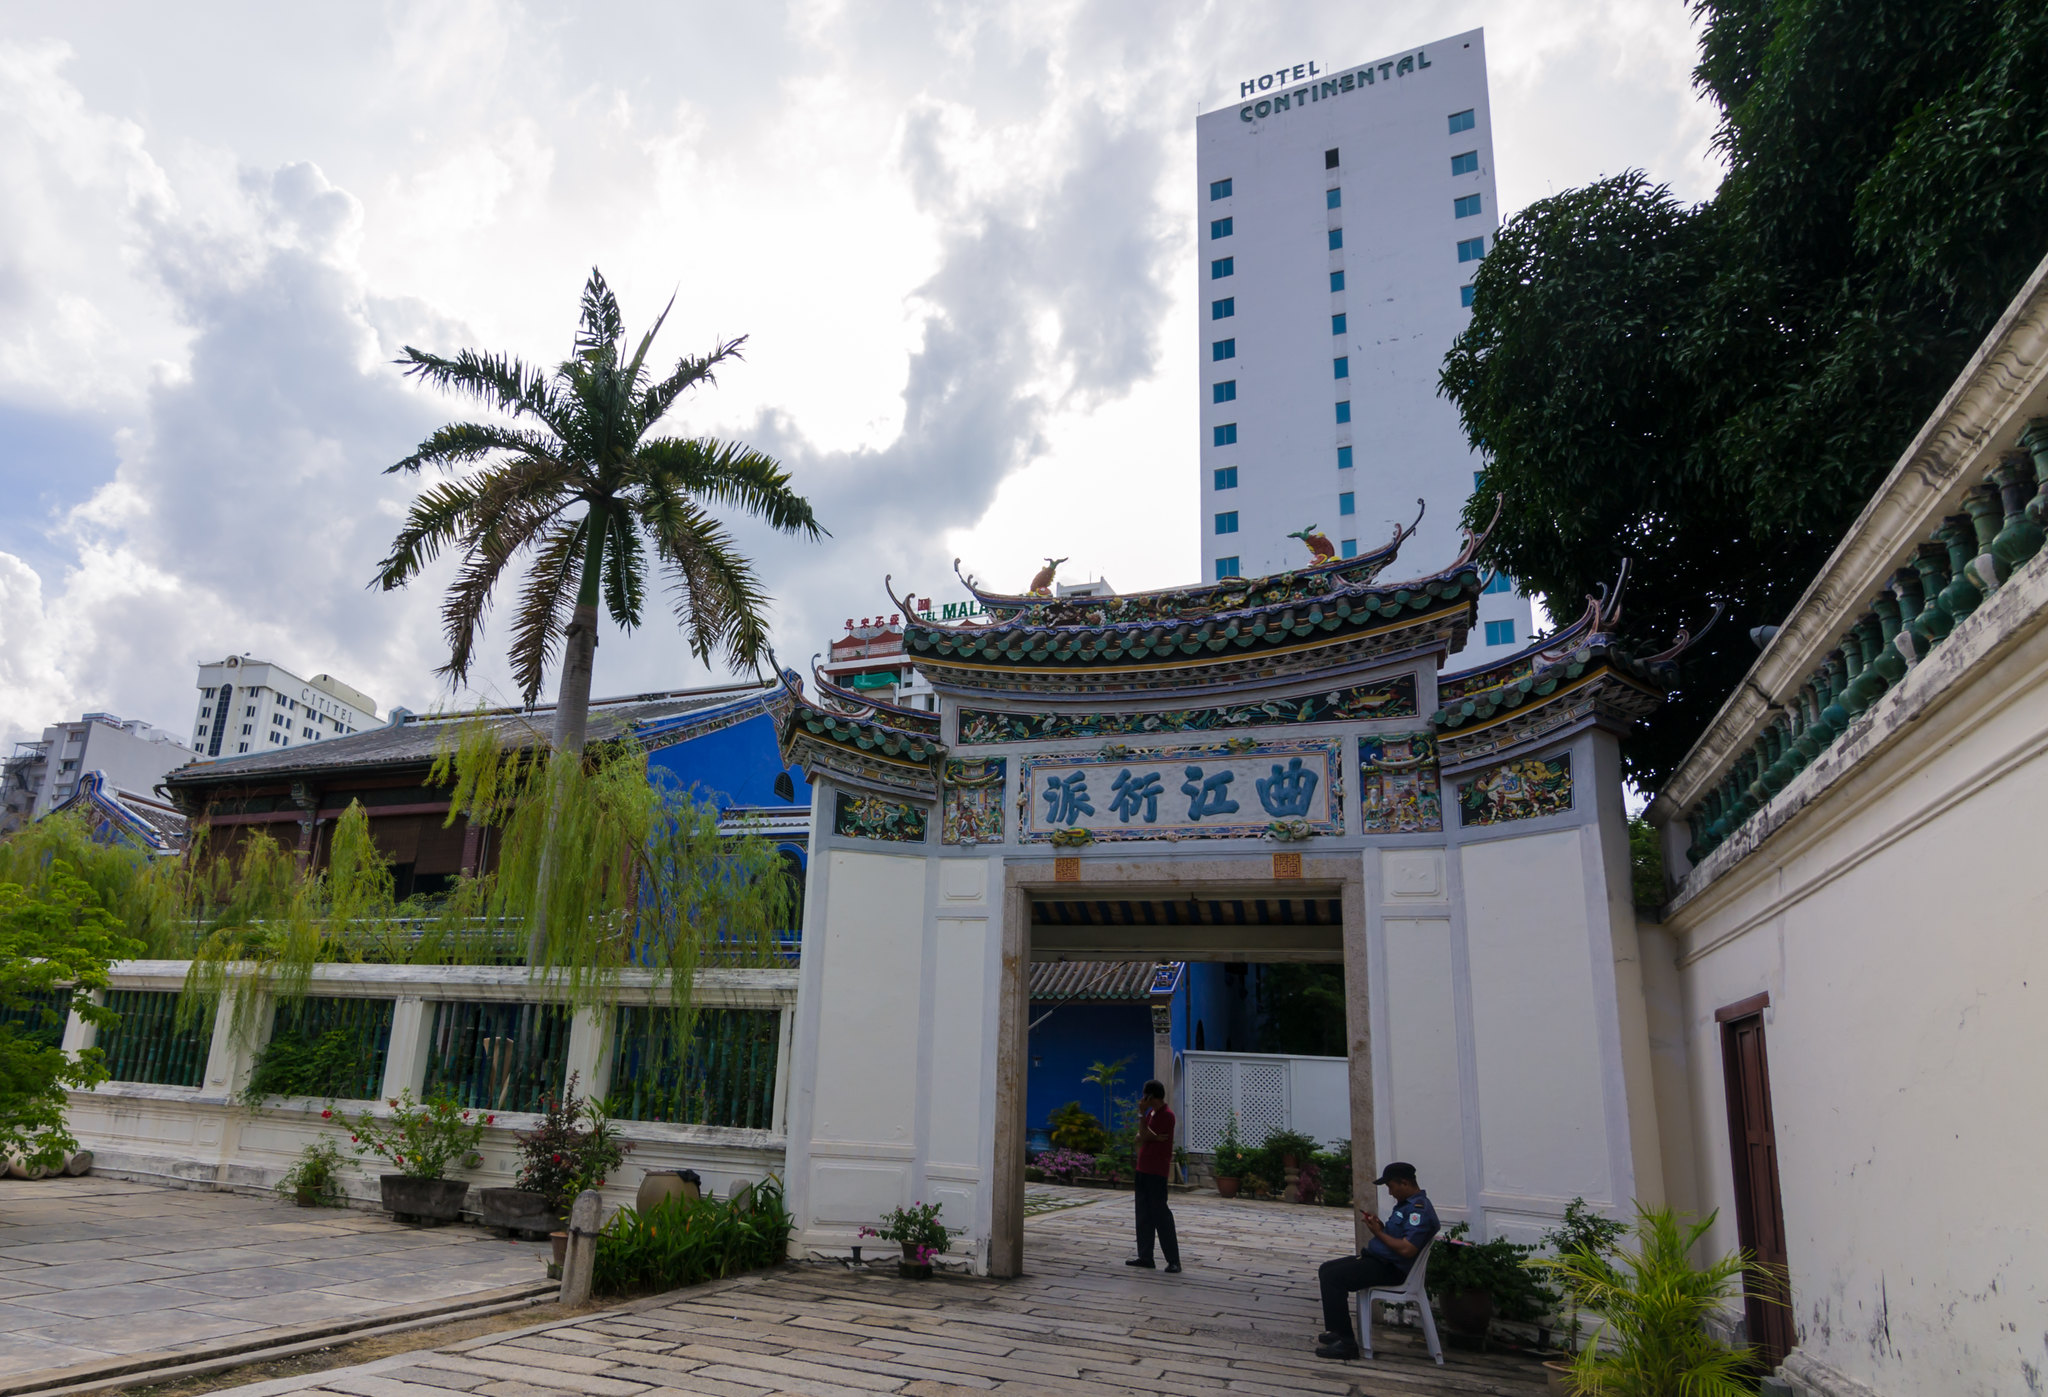 The Main-Gate of the Blue Mansion, George Town, Penang